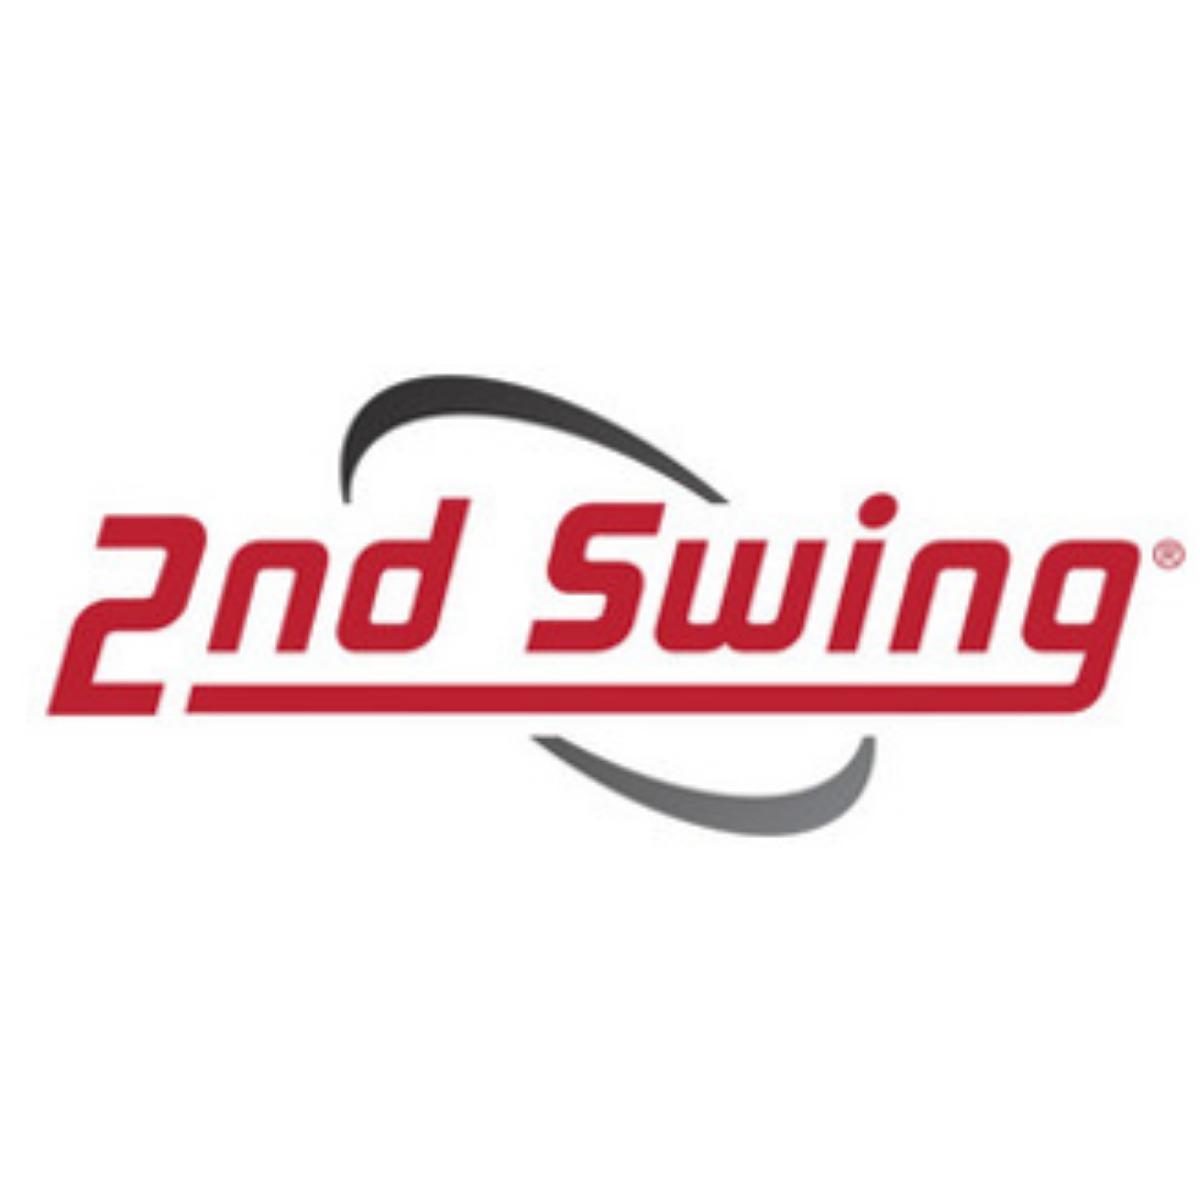 2nd Swing Golf - Minneapolis, MN 55413 - (612)331-9303 | ShowMeLocal.com